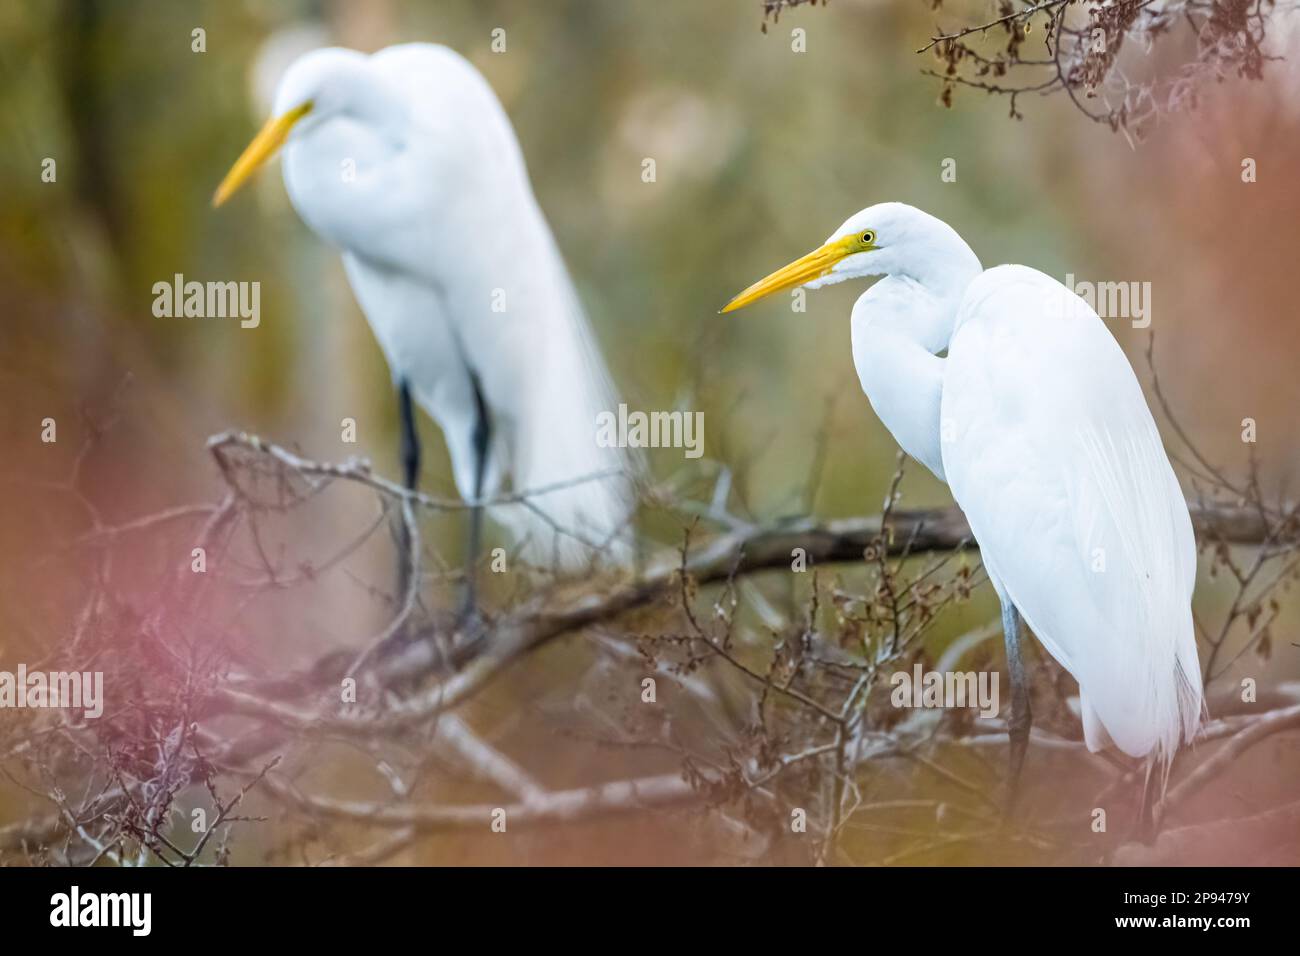 Elegant great egrets (Ardea alba) perched on branches in a wading bird rookery at Sawgrass in Ponte Vedra Beach, Florida. (USA) Stock Photo